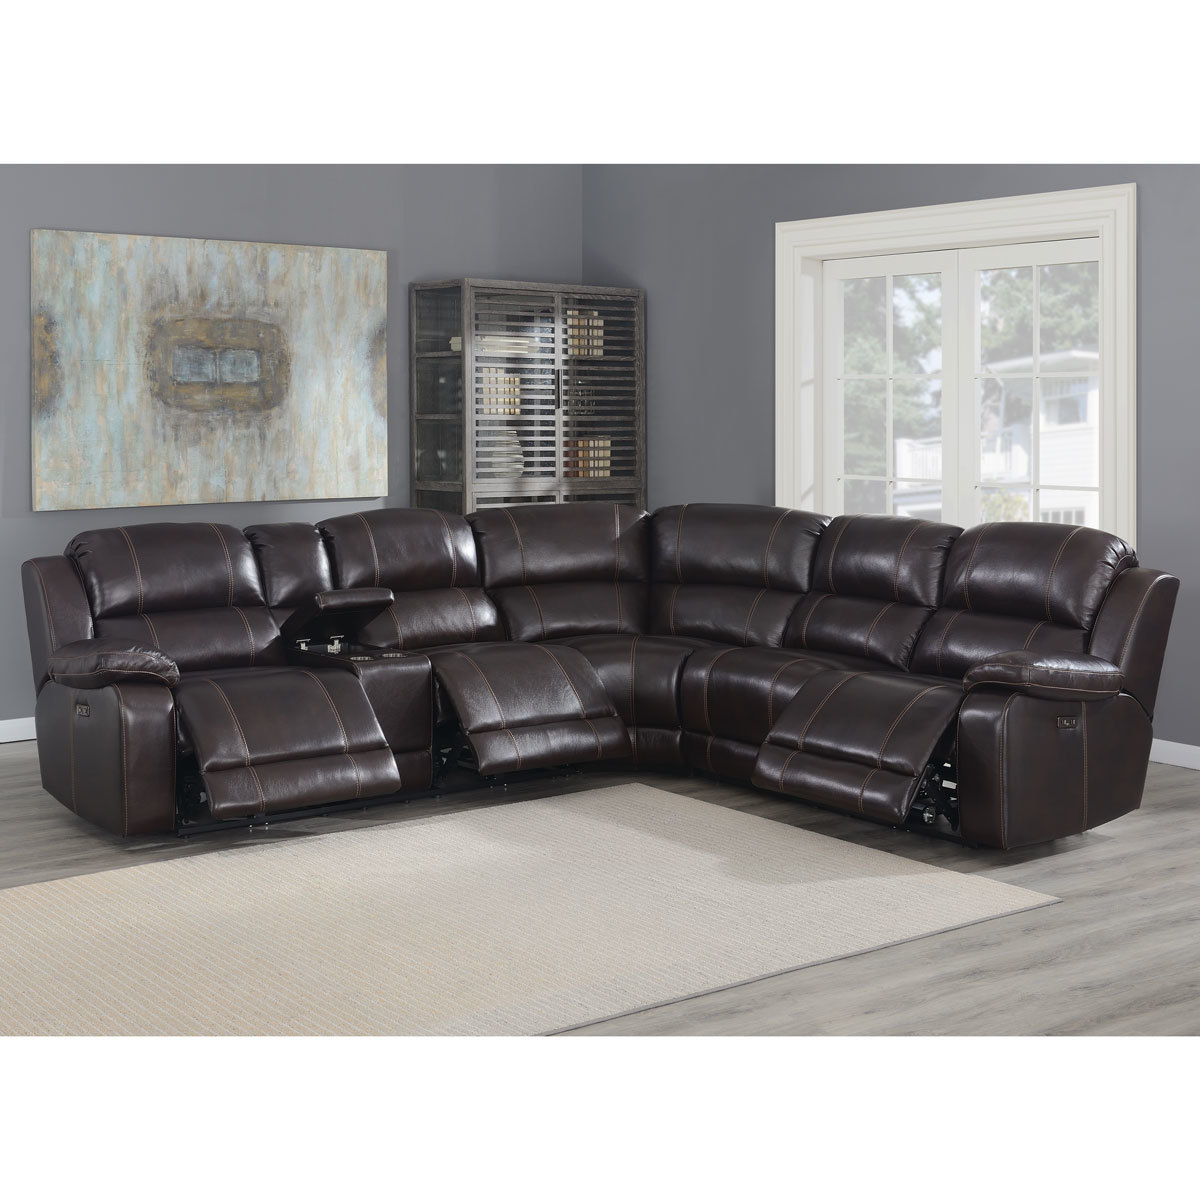 Pulaski Dunhill Brown Leather Power, Brown Leather Couch Costco